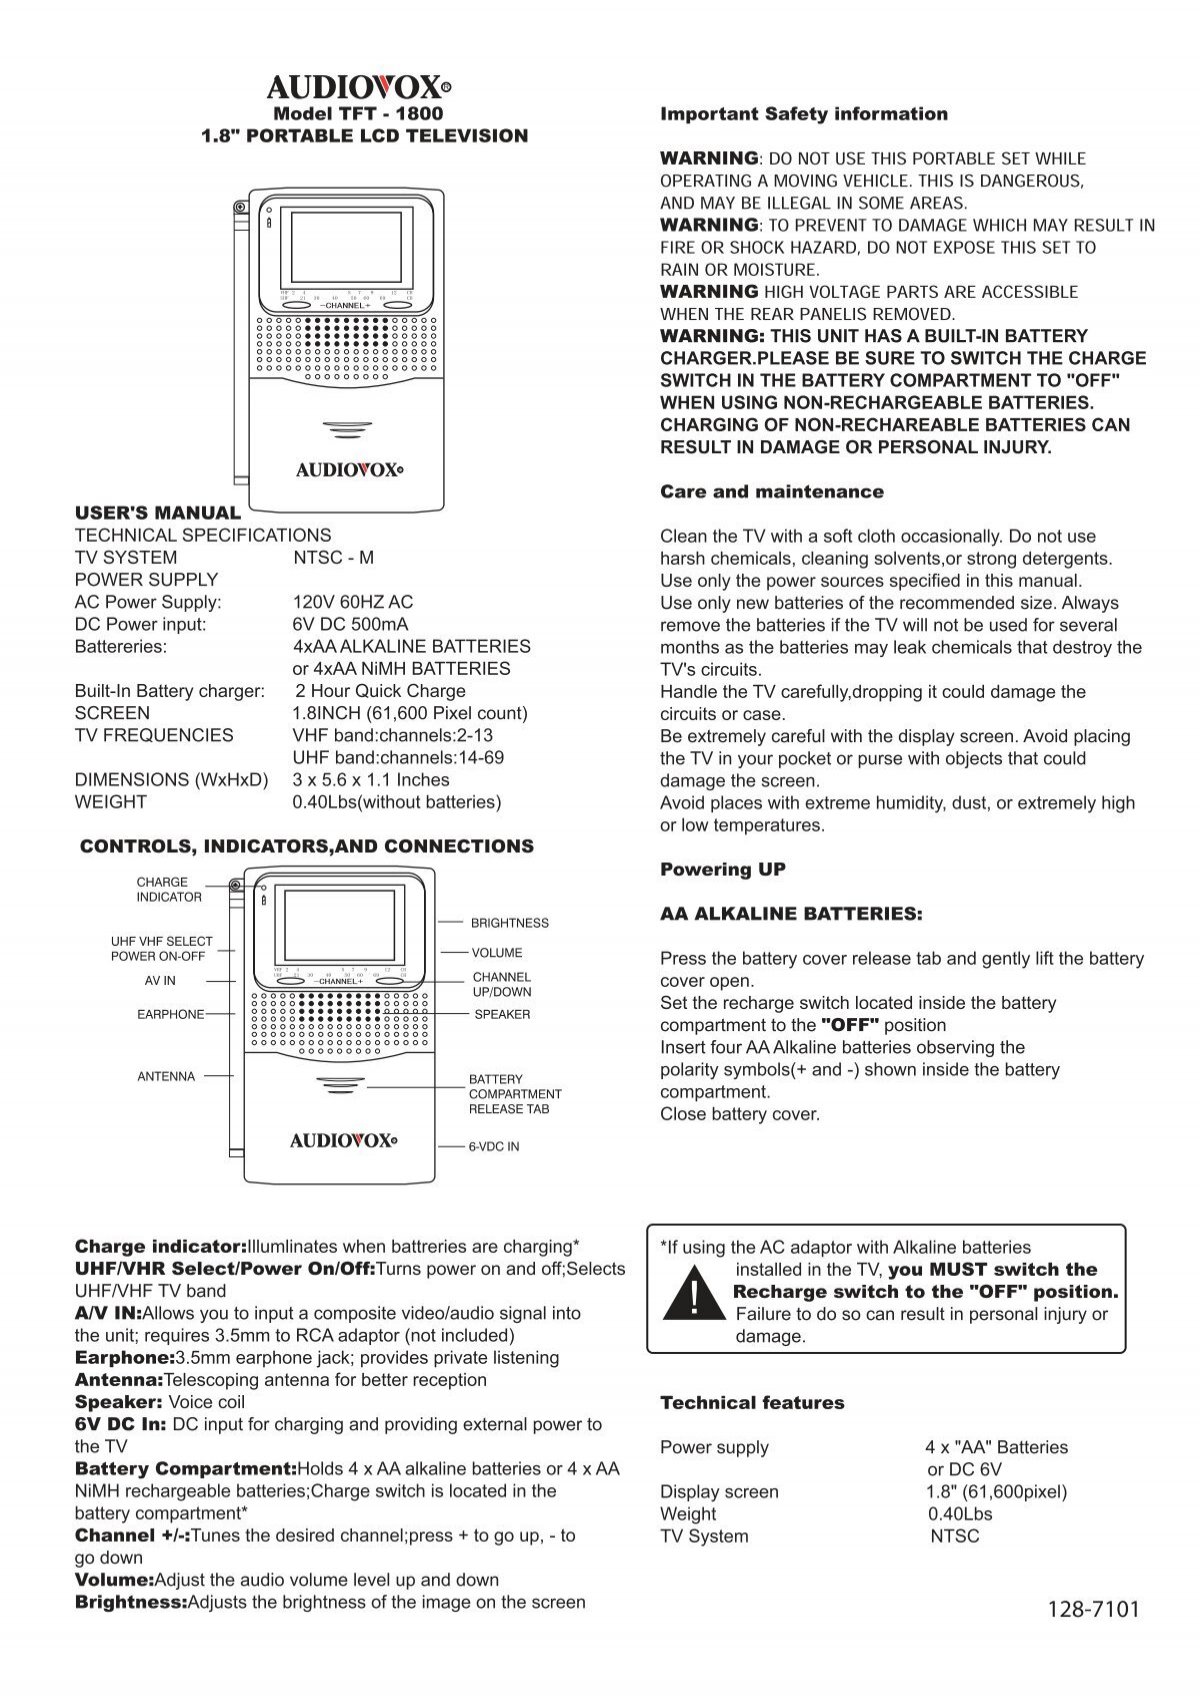 USER'S MANUAL TECHNICAL SPECIFICATIONS TV SYSTEM 